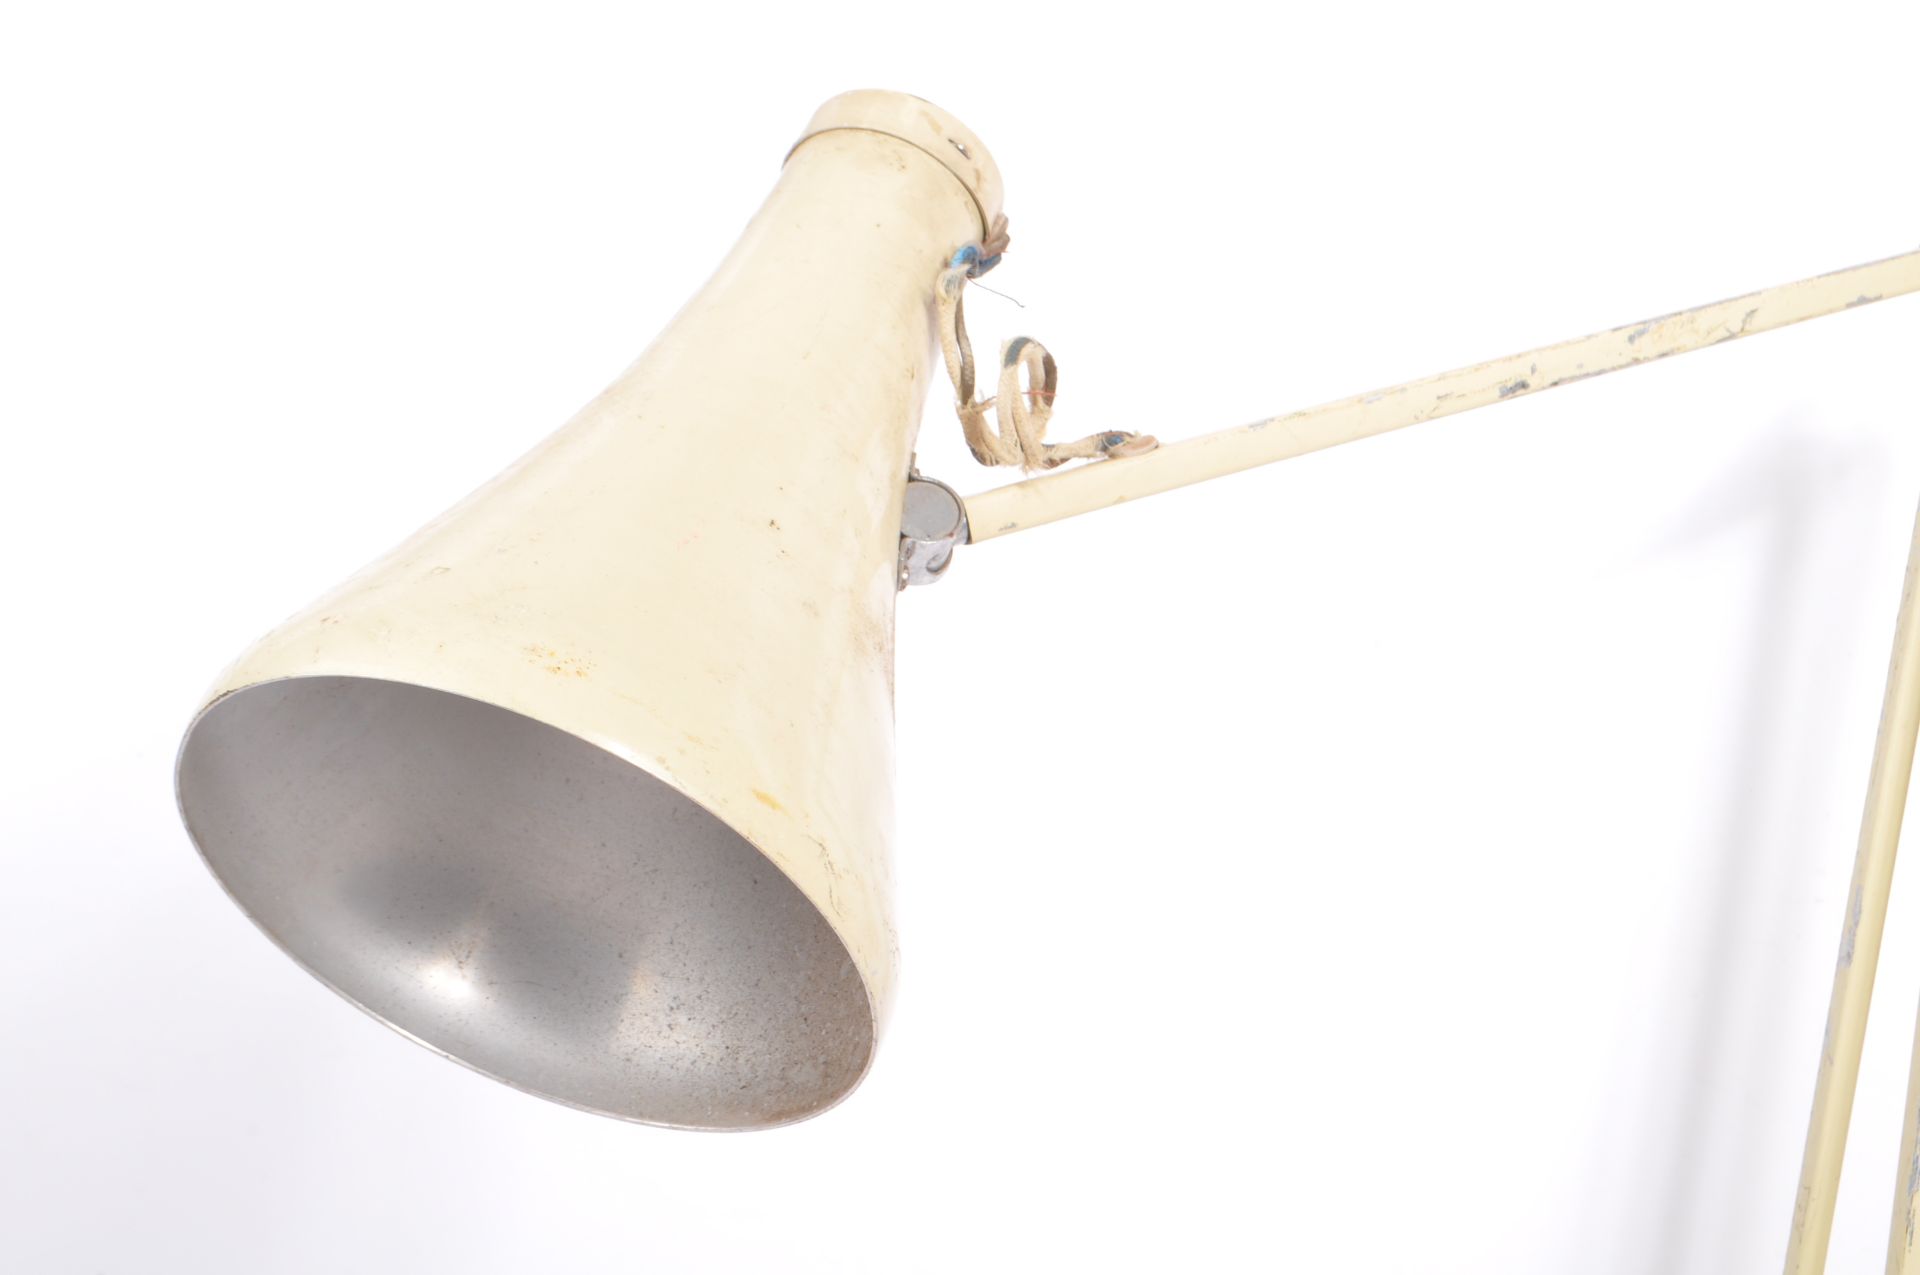 MID 20TH CENTURY ANGLEPOISE DESK LAMP - Image 5 of 7